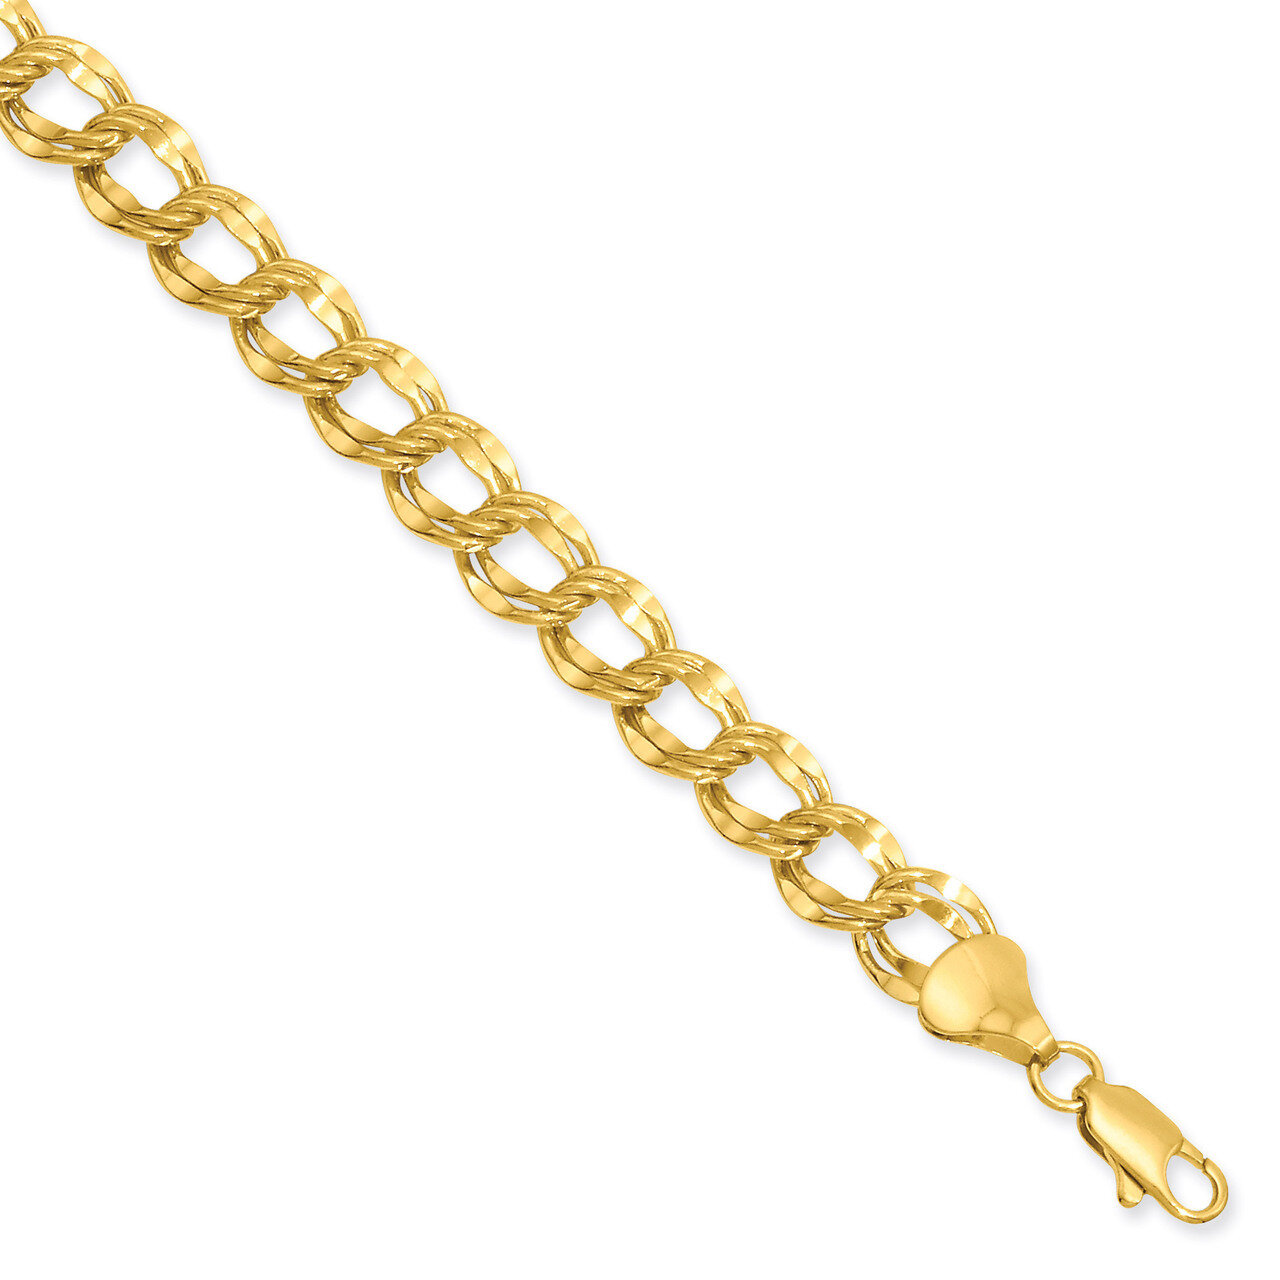 Kelly Waters 8mm Double Link Charm Bracelet 8.25 Inch Gold-plated KW493-8.25